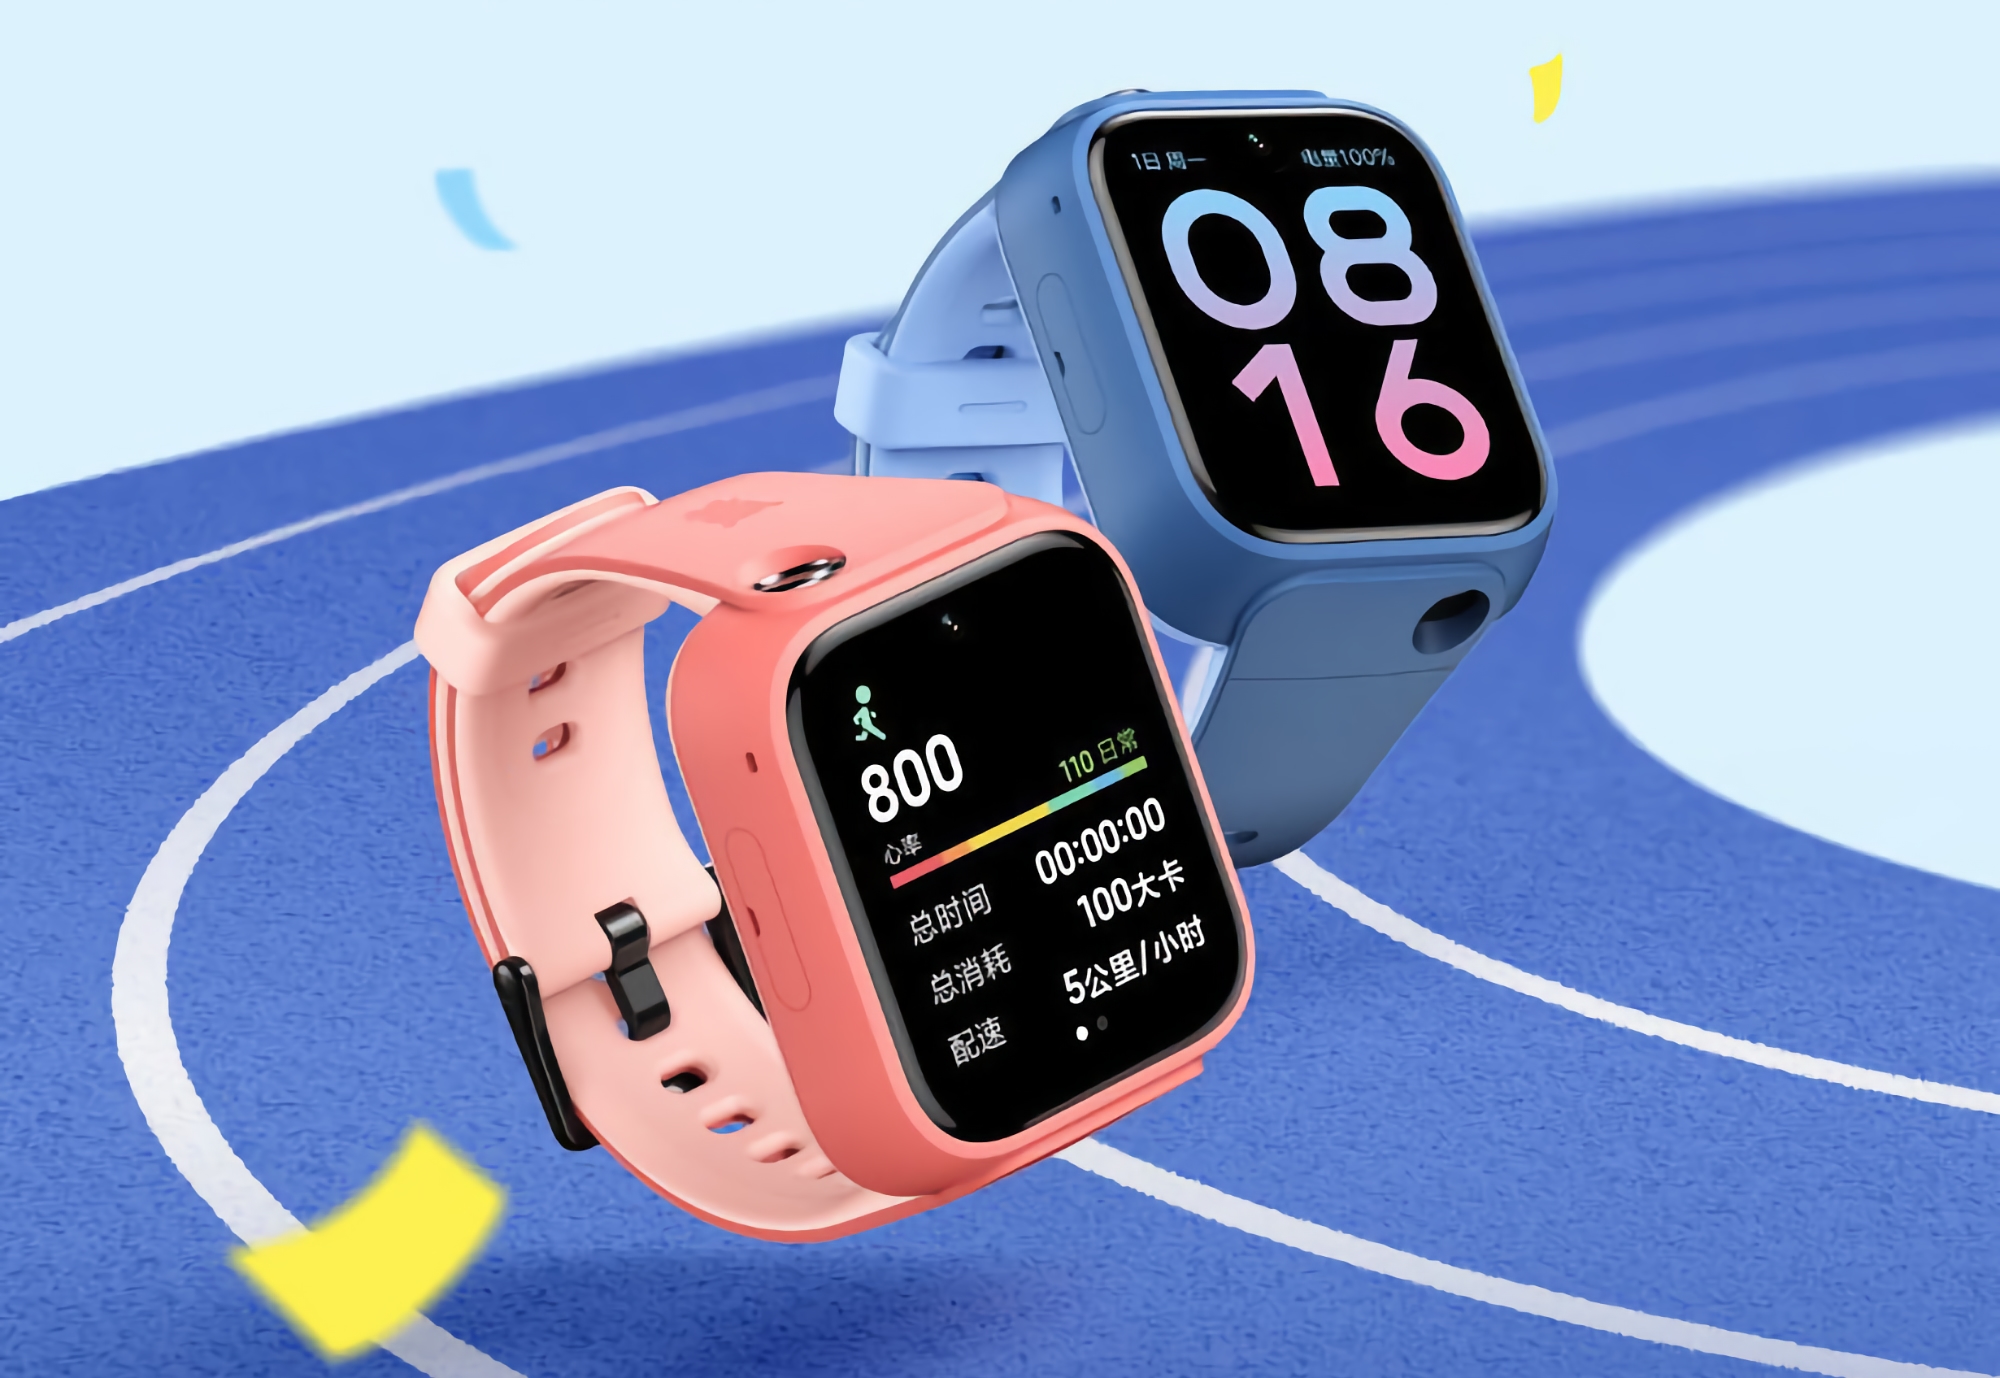 Xiaomi Mi Rabbit Children's Learning Watch 5 Pro: a children's smartwatch with two cameras, NFC, GPS and 1.78″ screen for $200